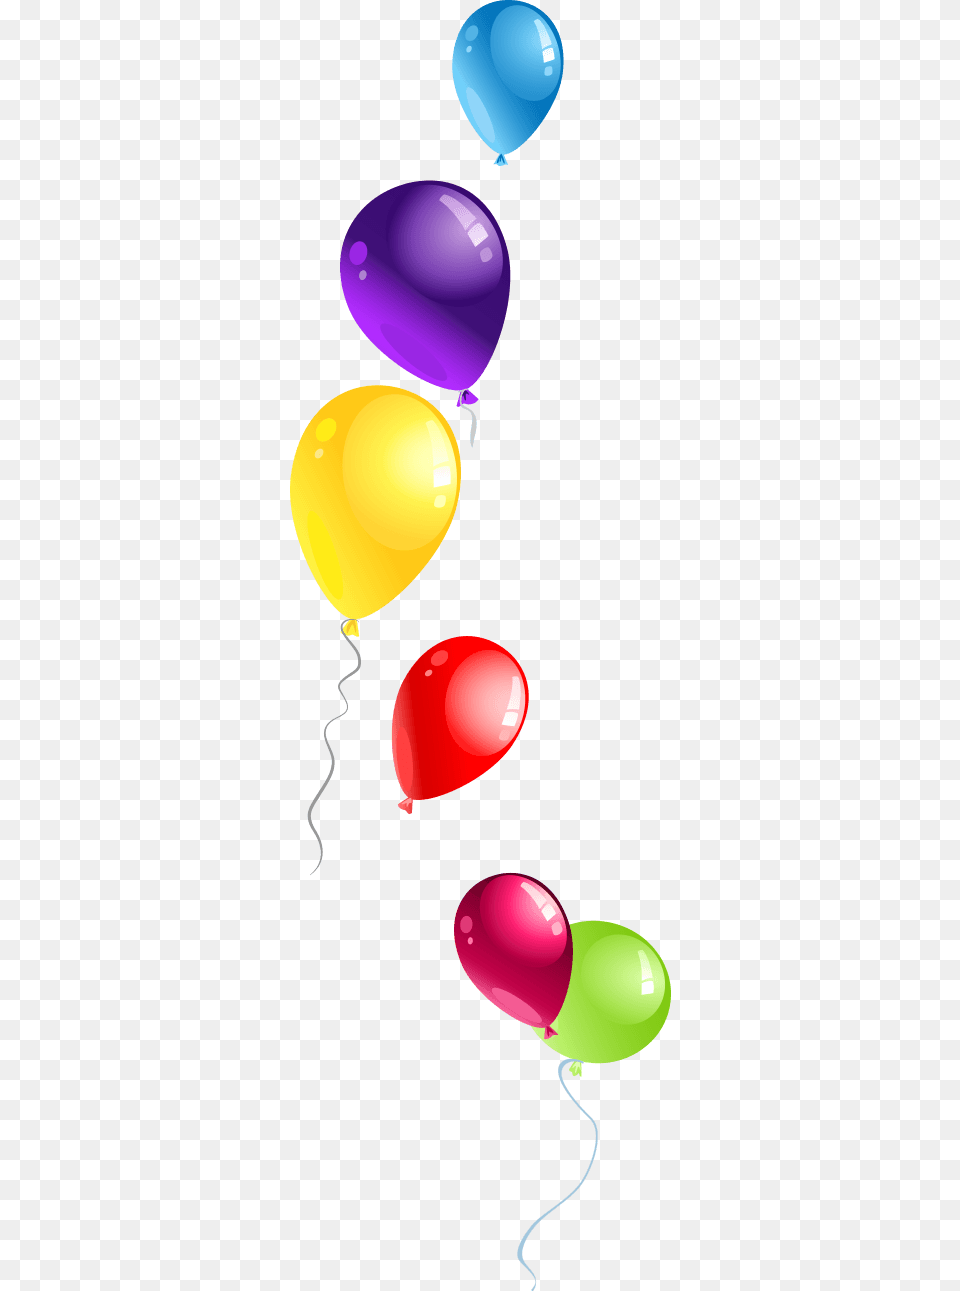 Balloonsarchesparty Partiesweddingshen Party Balloon Left Free Png Download